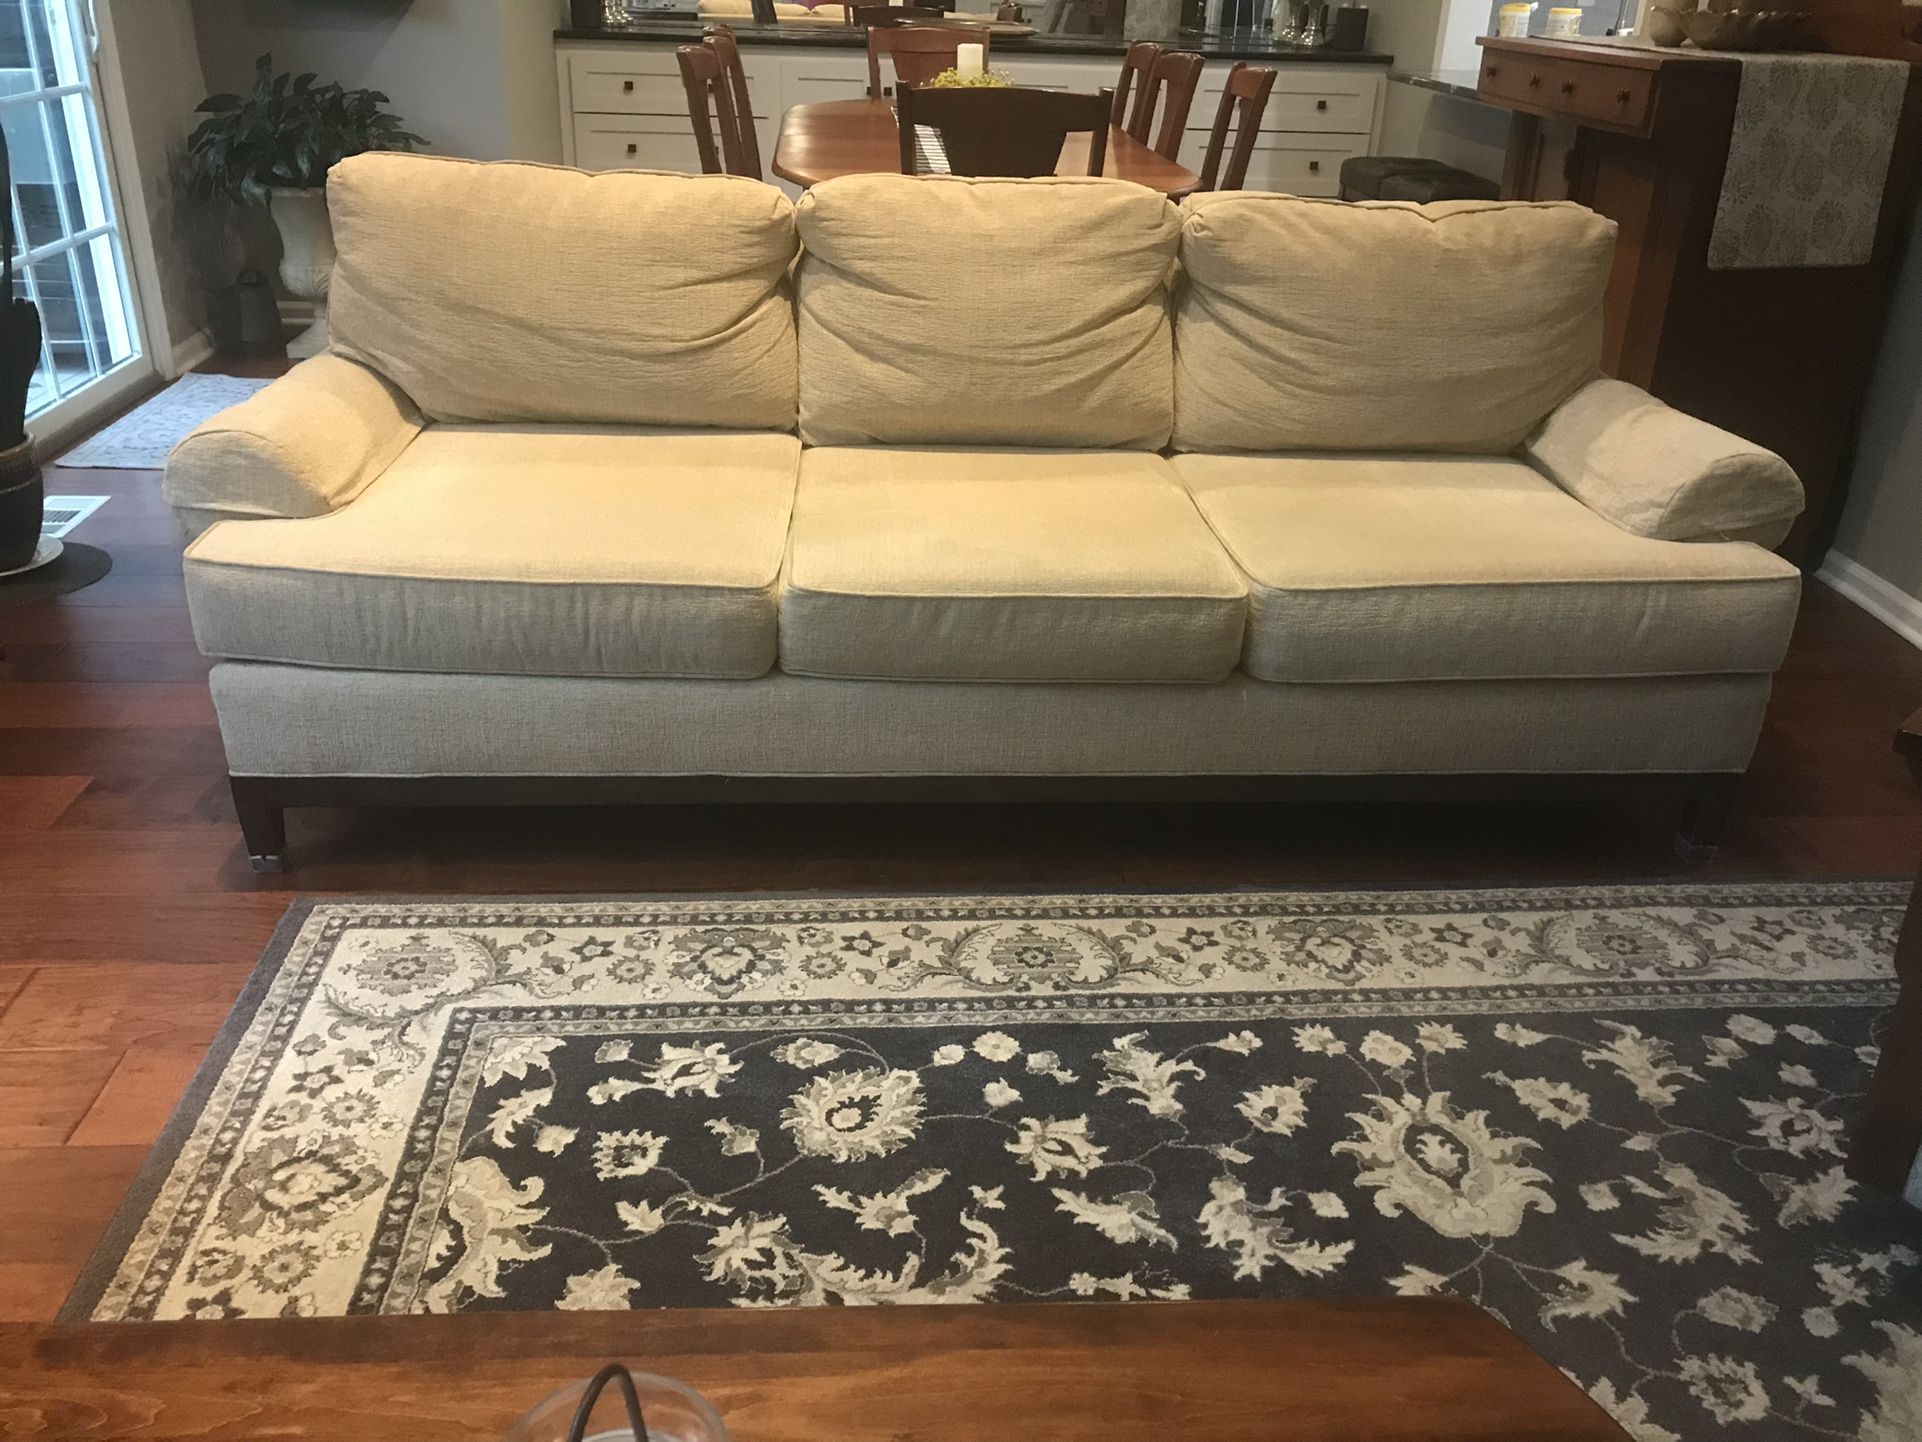 Bayles Neutral-Colored Sofa